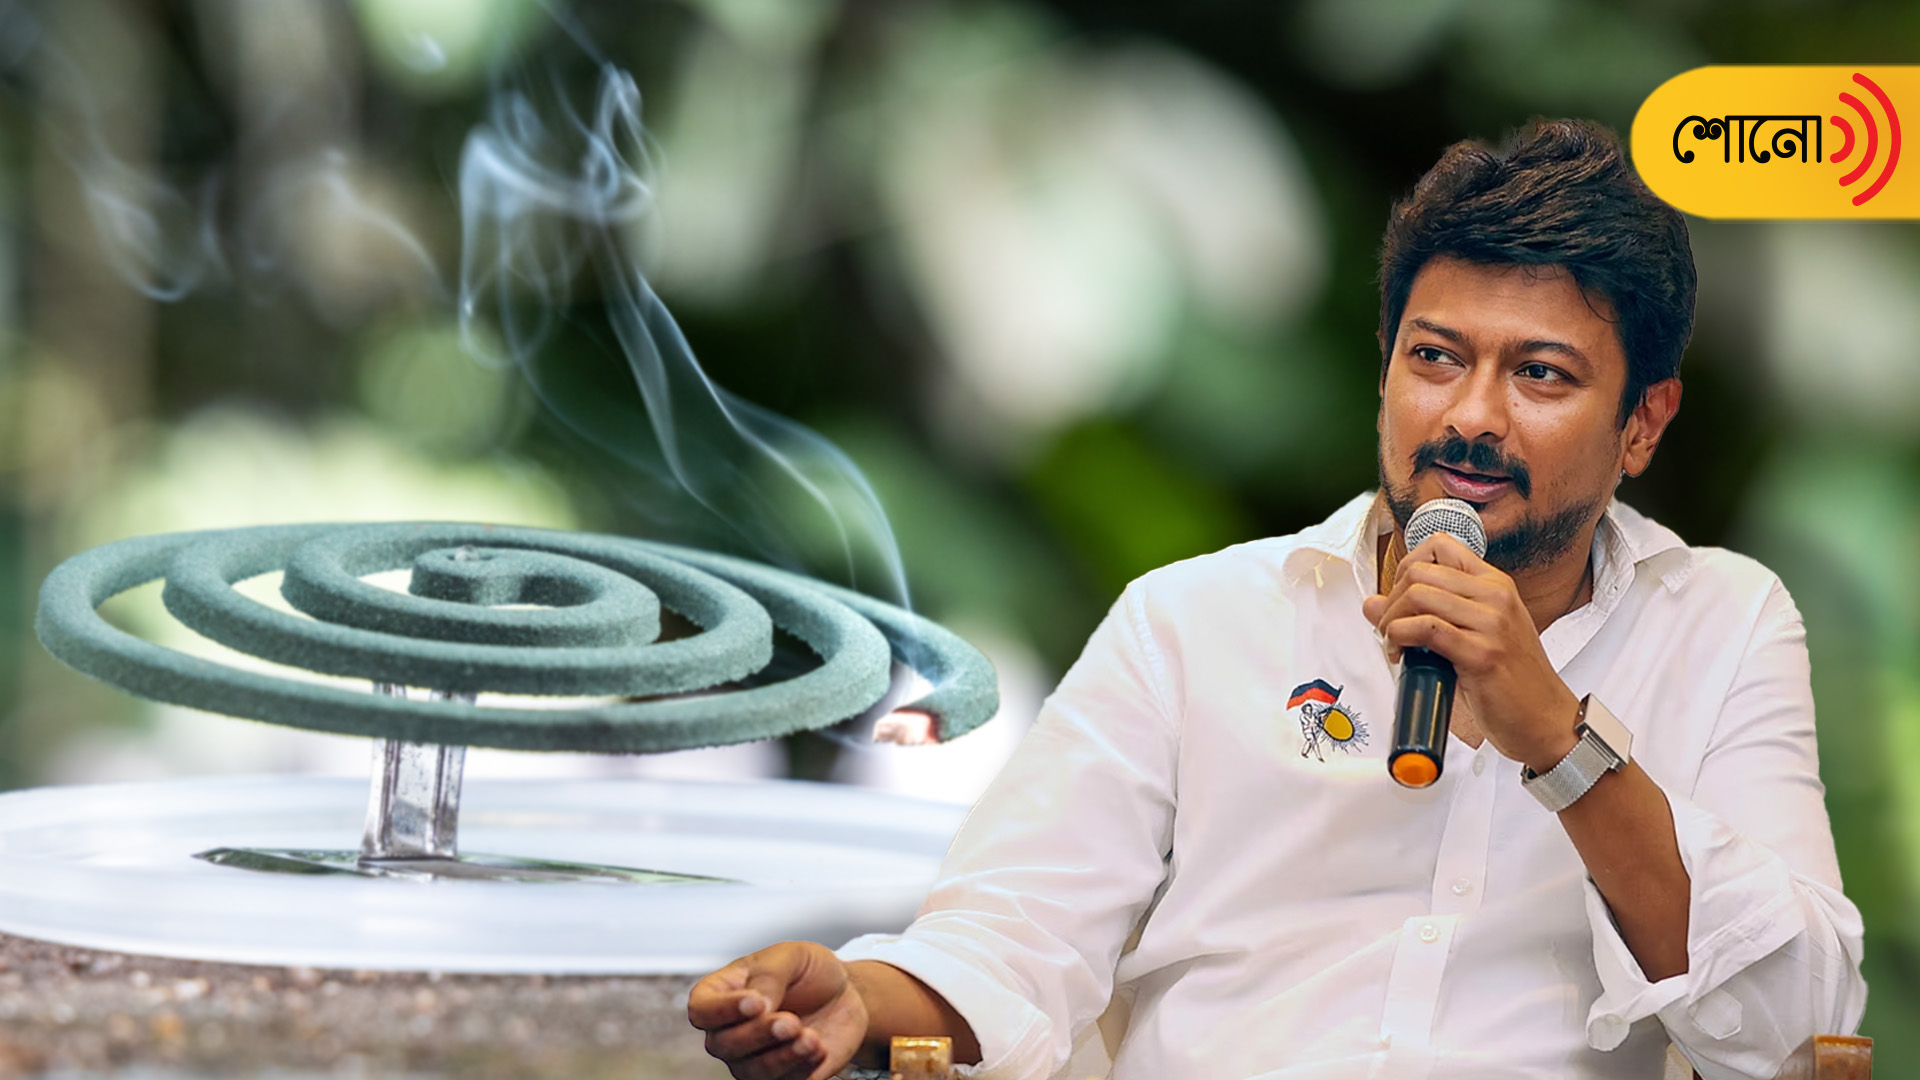 Udhayanidhi Stalin amps up ‘Sanatana Dharma’ row, shares pic of mosquito repellent